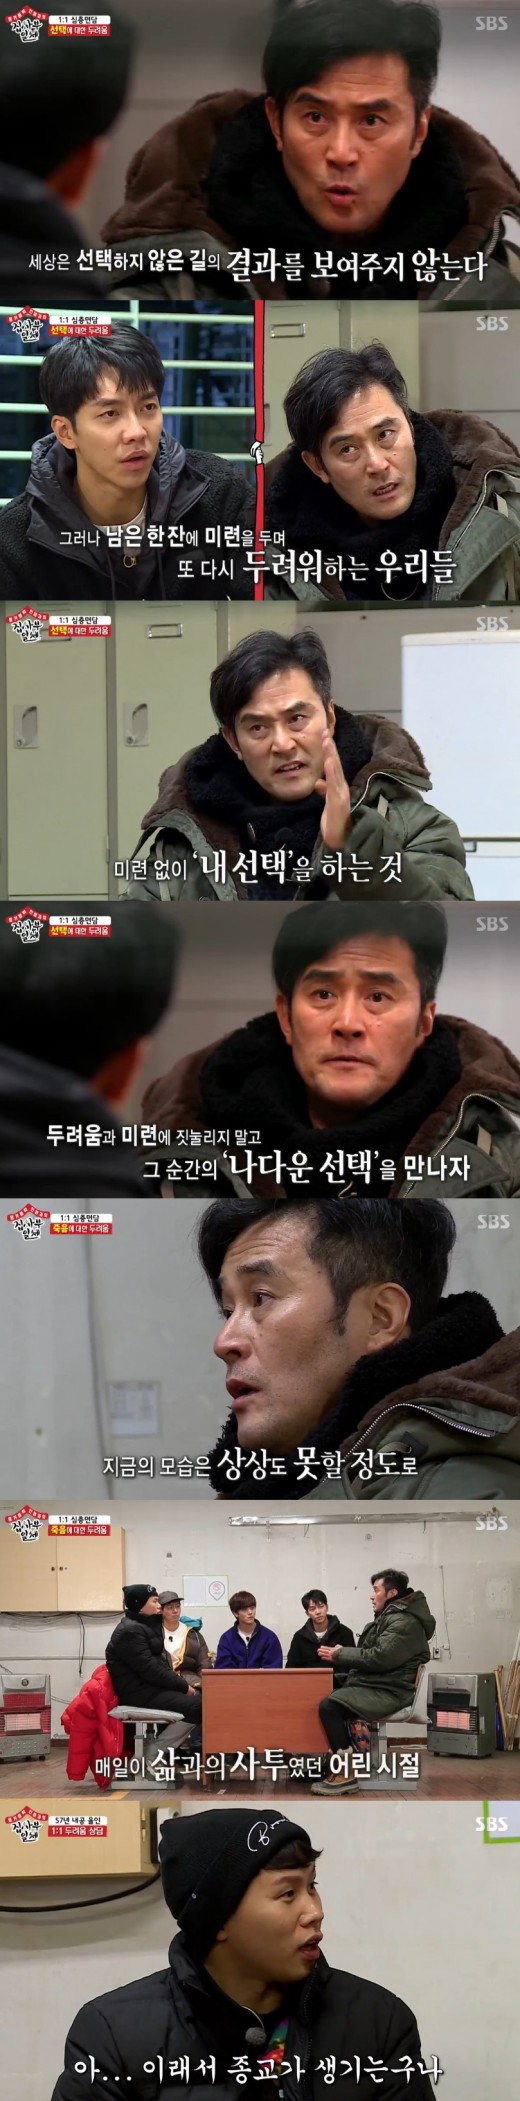 The formation of the Choi Min-soo Bridge. All The Butlers students were taught by Choi Min-soo.Choi Min-soo appeared in Master on SBS All The Butlers broadcast on the 20th to teach how to confront fear.Choi Min-soo has started a horrible consultation with 57 years of internal affairs. Choi Min-soo asked Lee Seung-gi on this day, What is your fear?Lee Seung-gi said, I am afraid that I will do wrong Choices about my work. I am anxious about what to do if I fail because of these Choices.In Lee Seung-gis troubles, Choi Min-soo said that there is no wrong in all Choices, saying, Do not define success and failure as dichotomy.The Choices you are talking about will never be arranged dichotomically. Choi Min-soo also told me that there is a glass that is not just an explanation, but a glass that is not seen in the world using green tea and tea.Choi Min-soo said, Ill think again in my head when I know there are three Choices, but the odds are smaller.Dont be foolish, so Choices are neat, and if you keep being foolish, you wont be able to do your own Choices.Yang Se-hyeong expressed his fears about leaving the world, and this time, Choi Min-soo delivered heartfelt advice against his experience.Choi Min-soo recalled that he was diagnosed with health problems in his middle 2 and that he could not play anymore. It was hard to accept at my age, he recalled.Choi Min-soo said, Then I came across it, that my body could be a blessing. Every moment I breathe on this earth from a certain point was new to me.Im not going to have an old morning, but Im coming to a new one. I want you to value the moment.Yang Se-hyeong said, This is why religion is created. He was impressed by Choi Min-soos teachings.